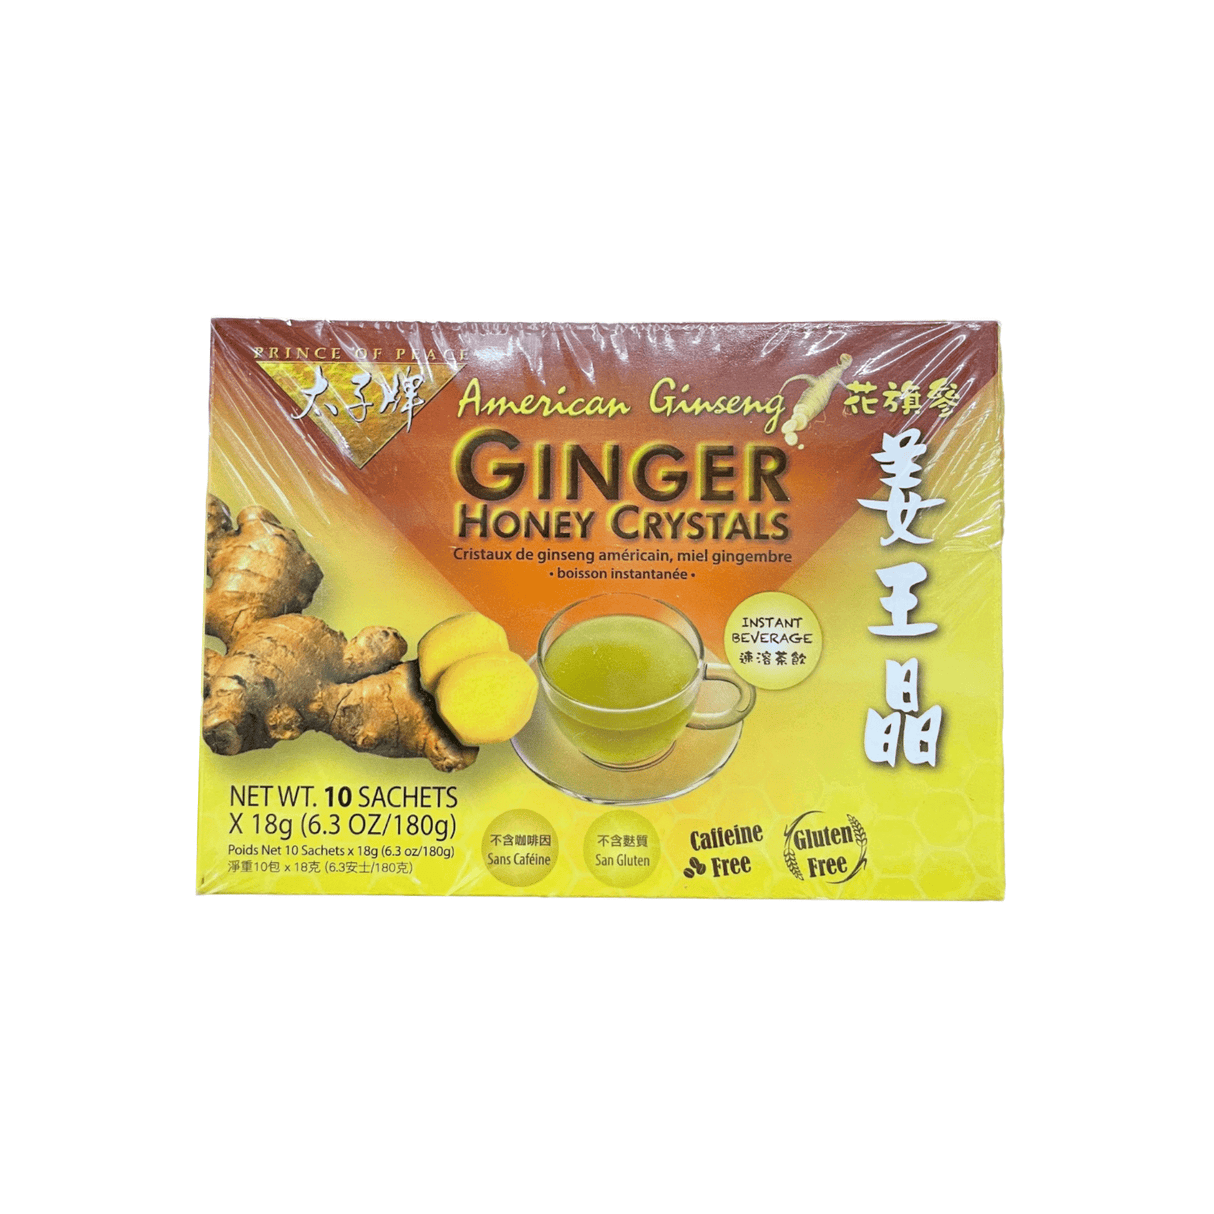 Prince of Peace American Ginseng Ginger Honey Crystals